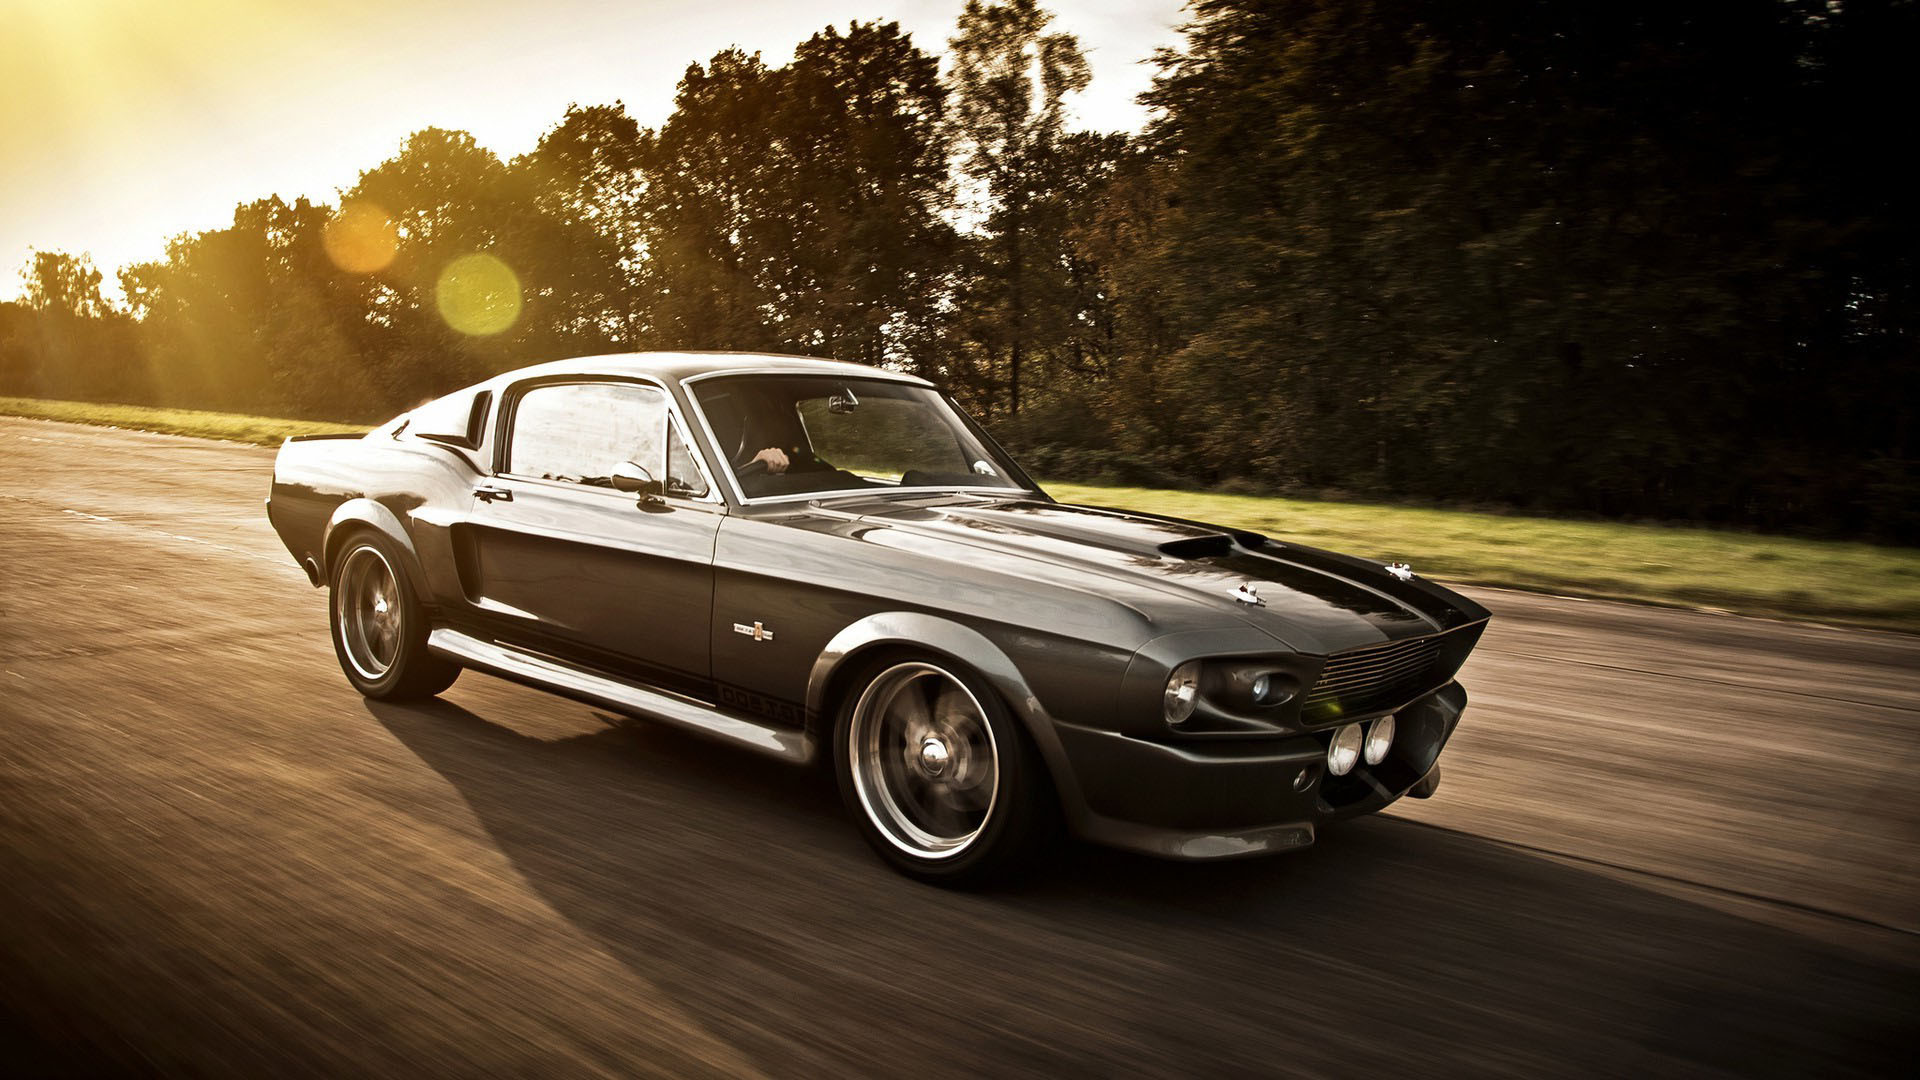 1920x1080 Download Classic Ford Mustang Wallpaper HD